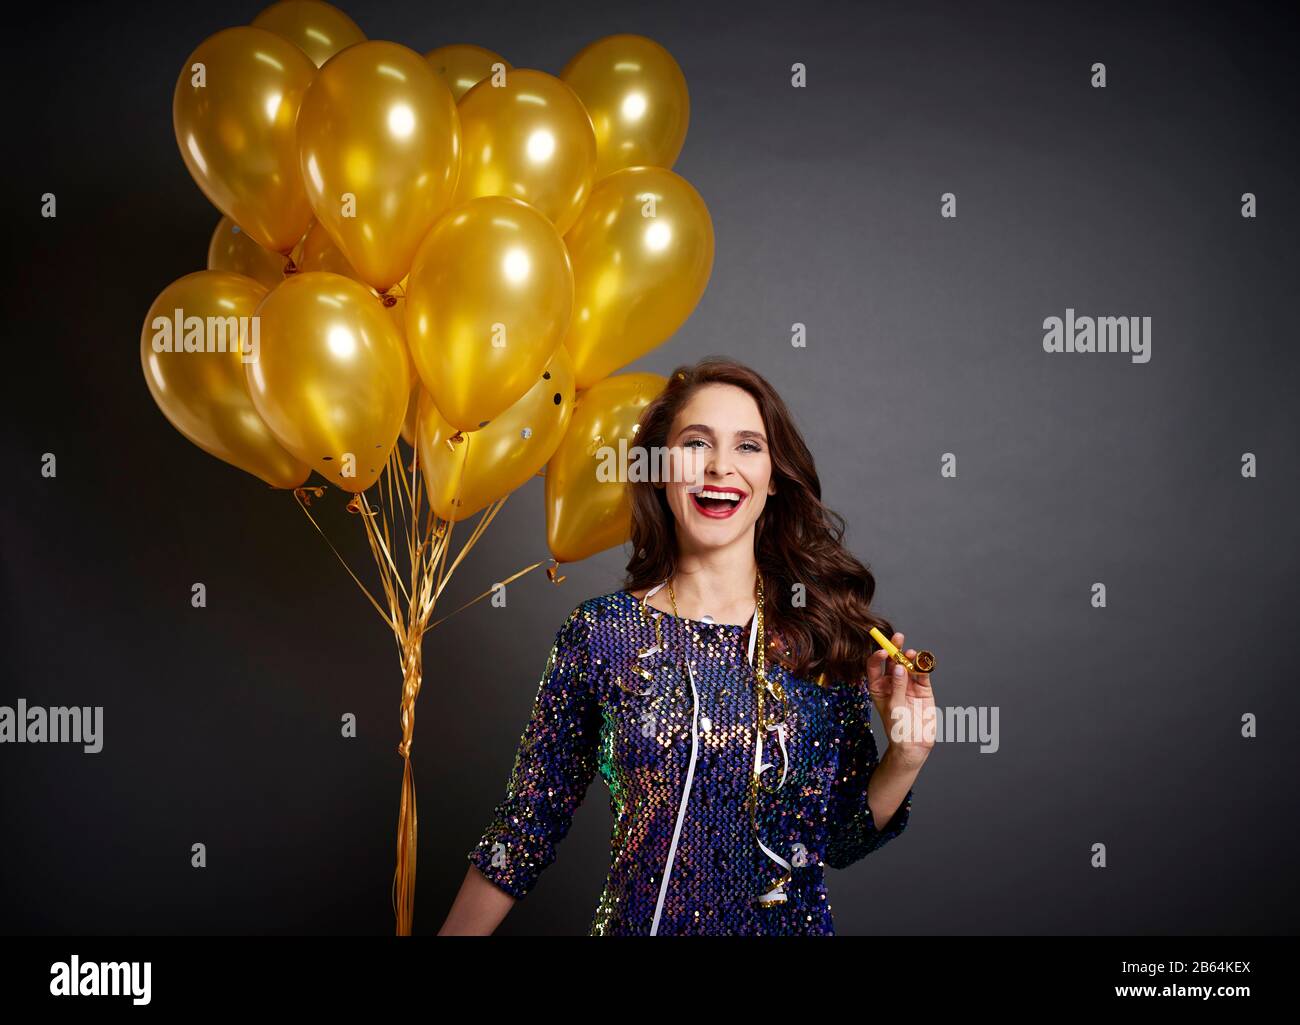 Beautiful woman with golden balloons in studio shot Stock Photo